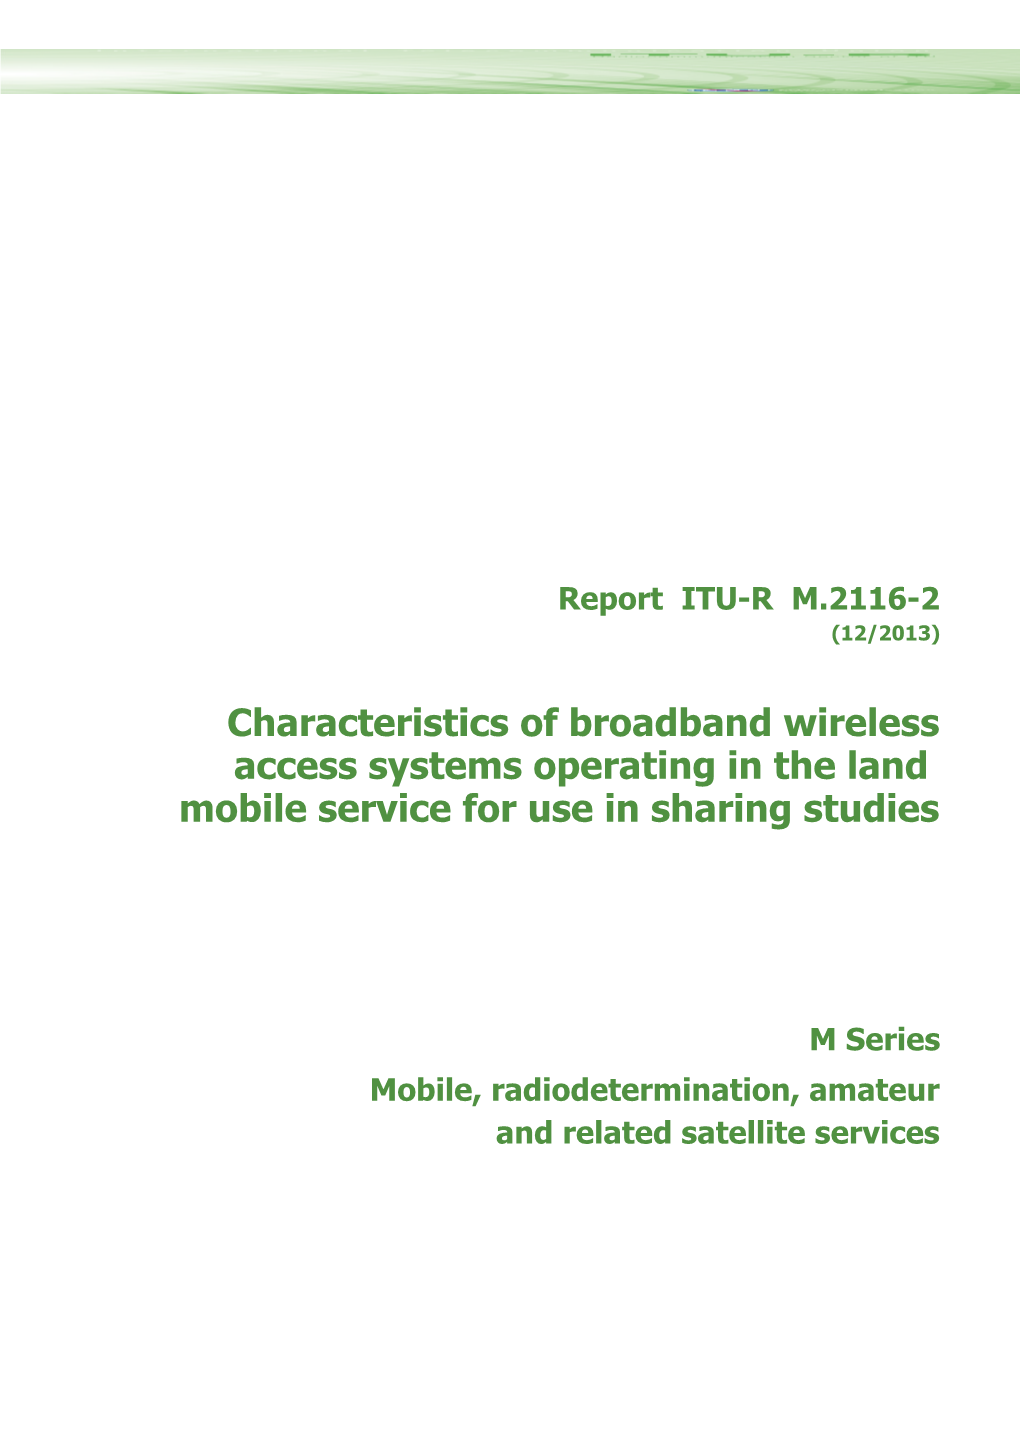 Characteristics of Broadband Wireless Access Systems Operating in the Land Mobile Service